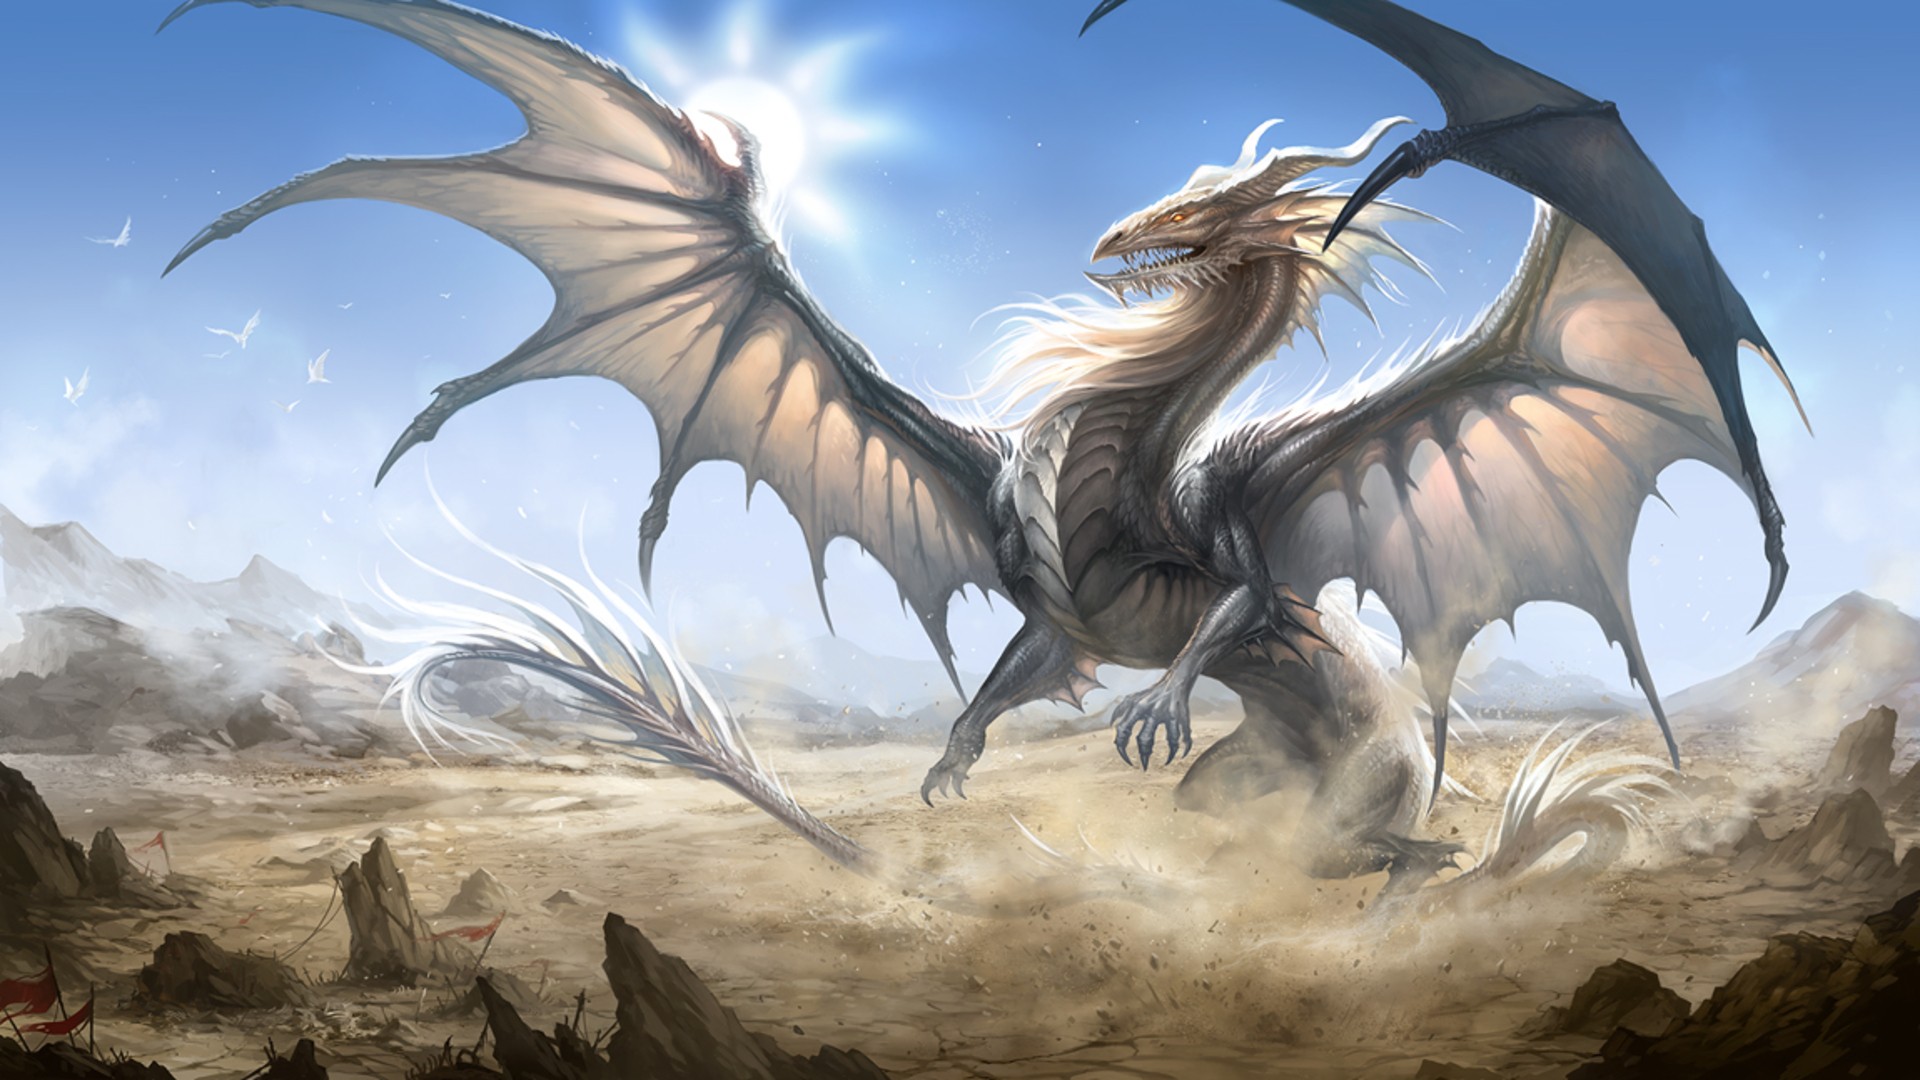 47+ Dragon wallpapers ·① Download free amazing full HD ...